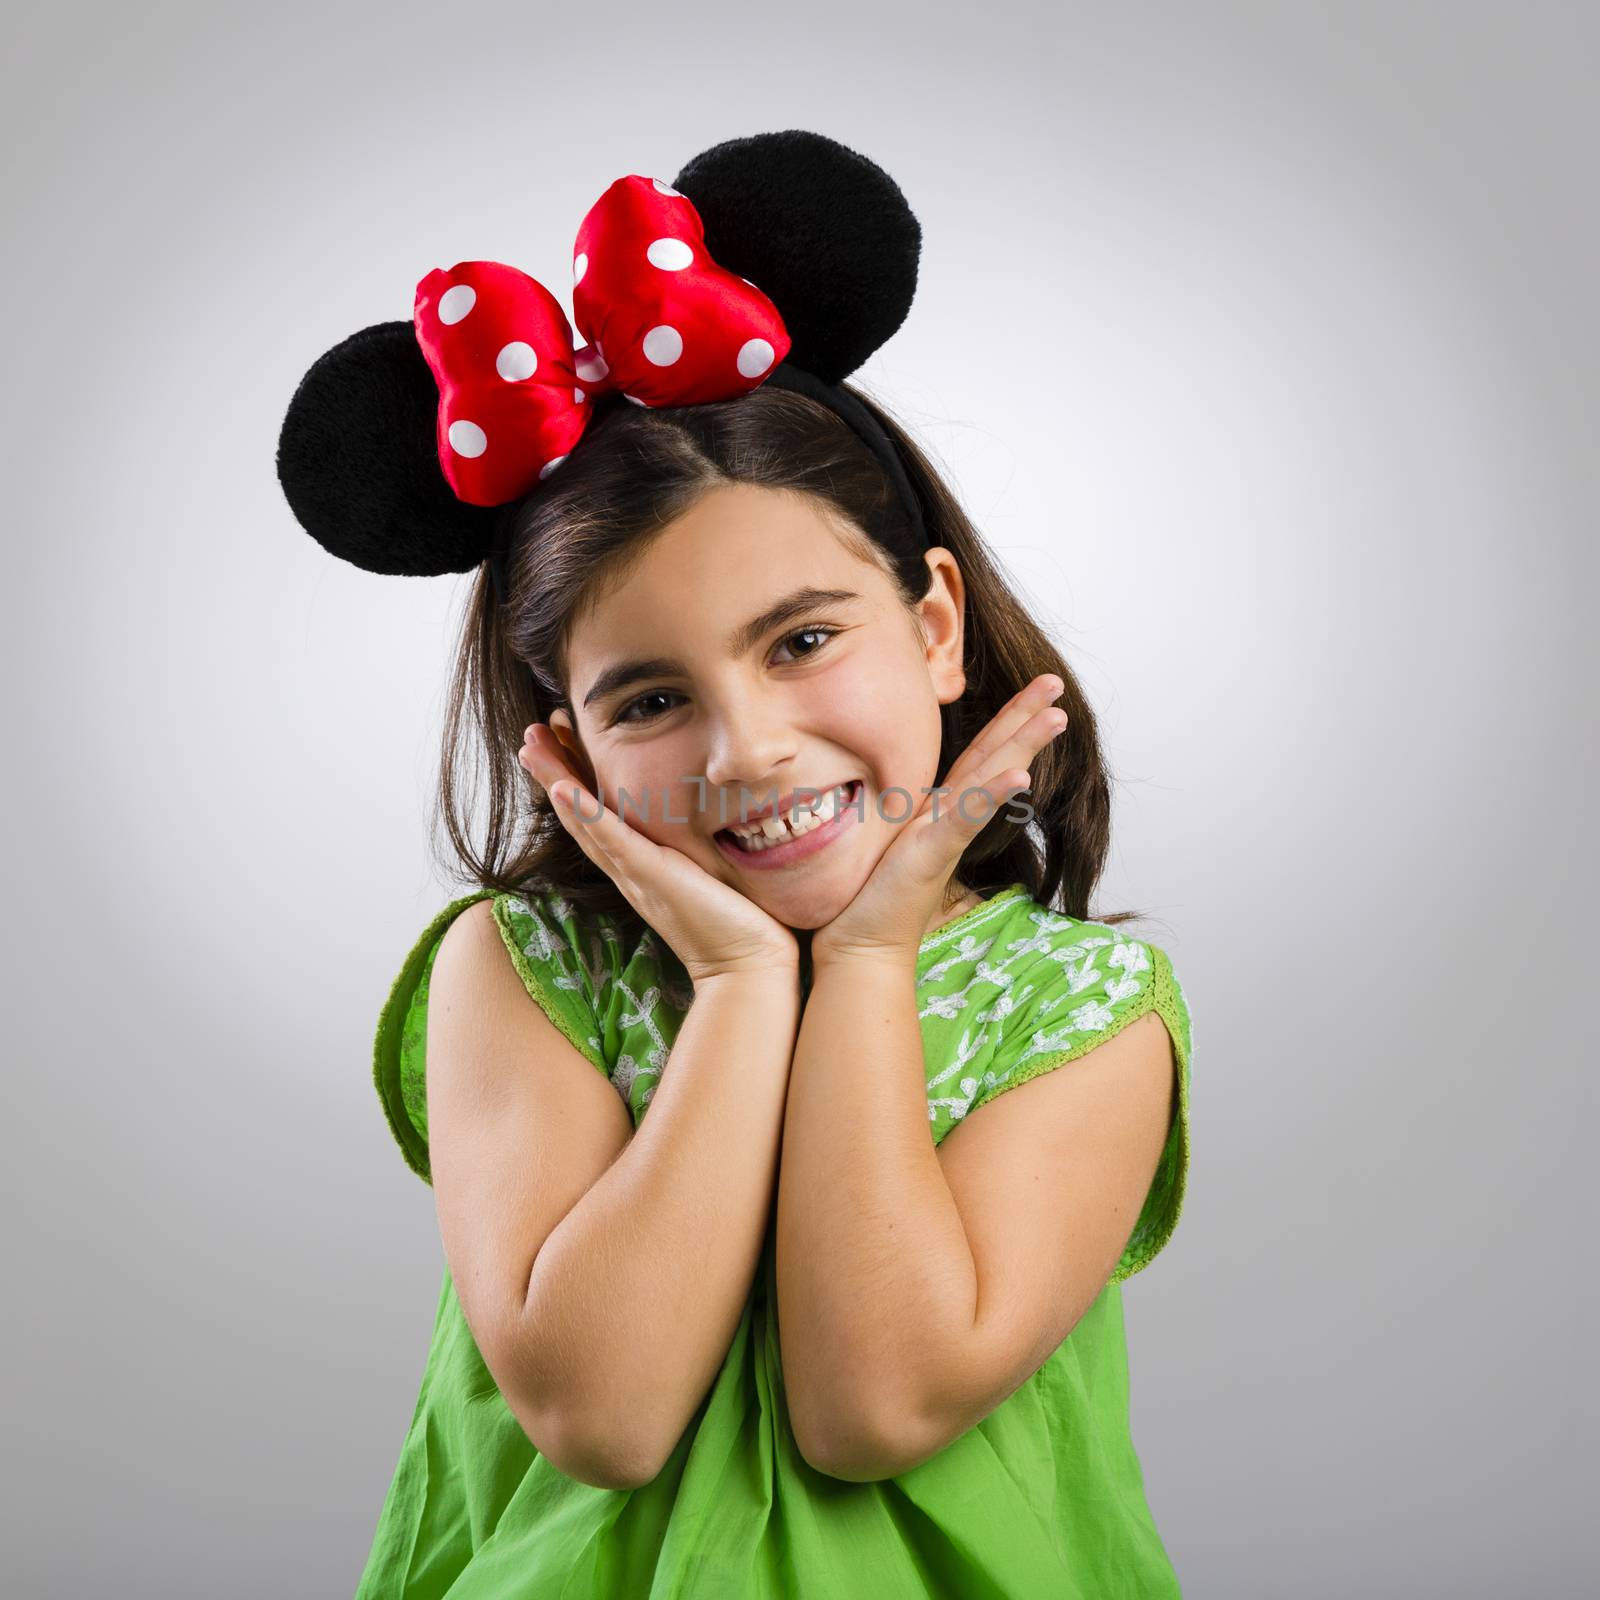 Studio portrait of a little girl with mouse ears